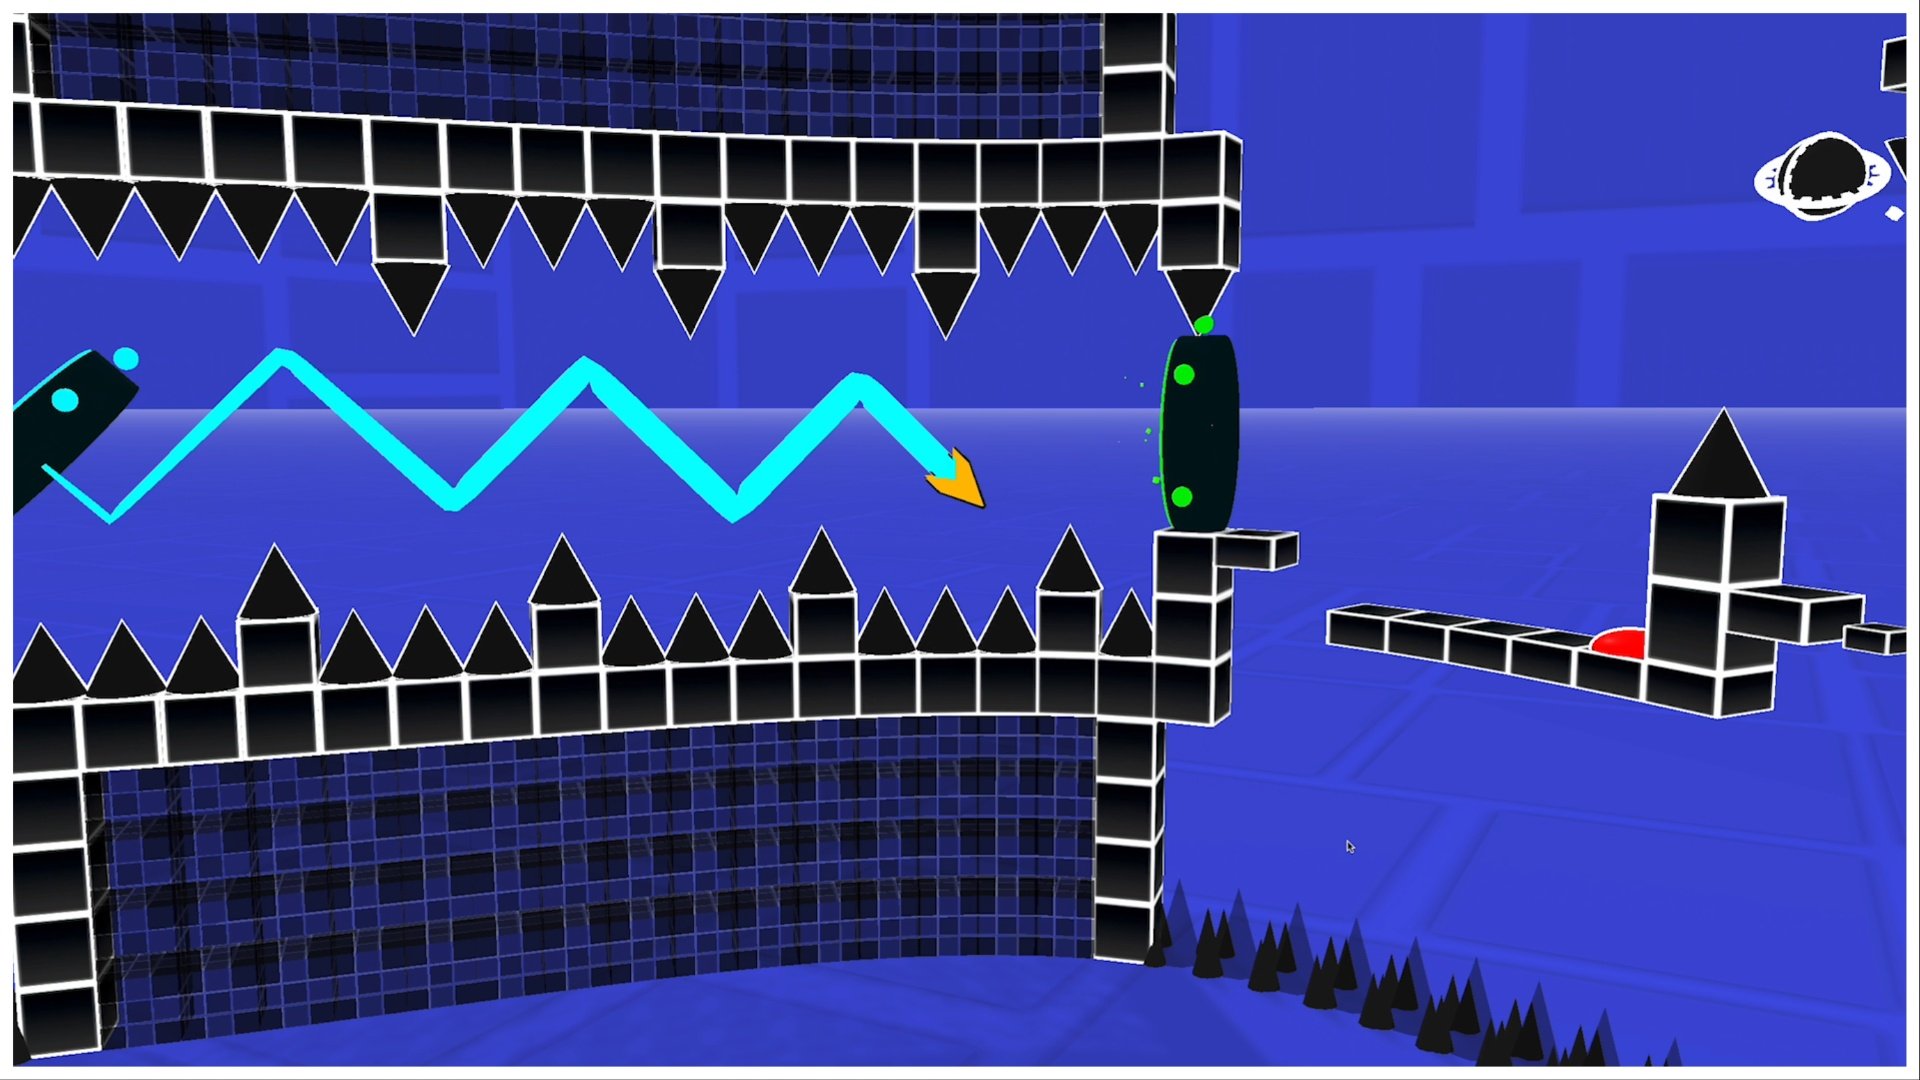 the image shows a blue level where the cube is zigzagging through black obstacles